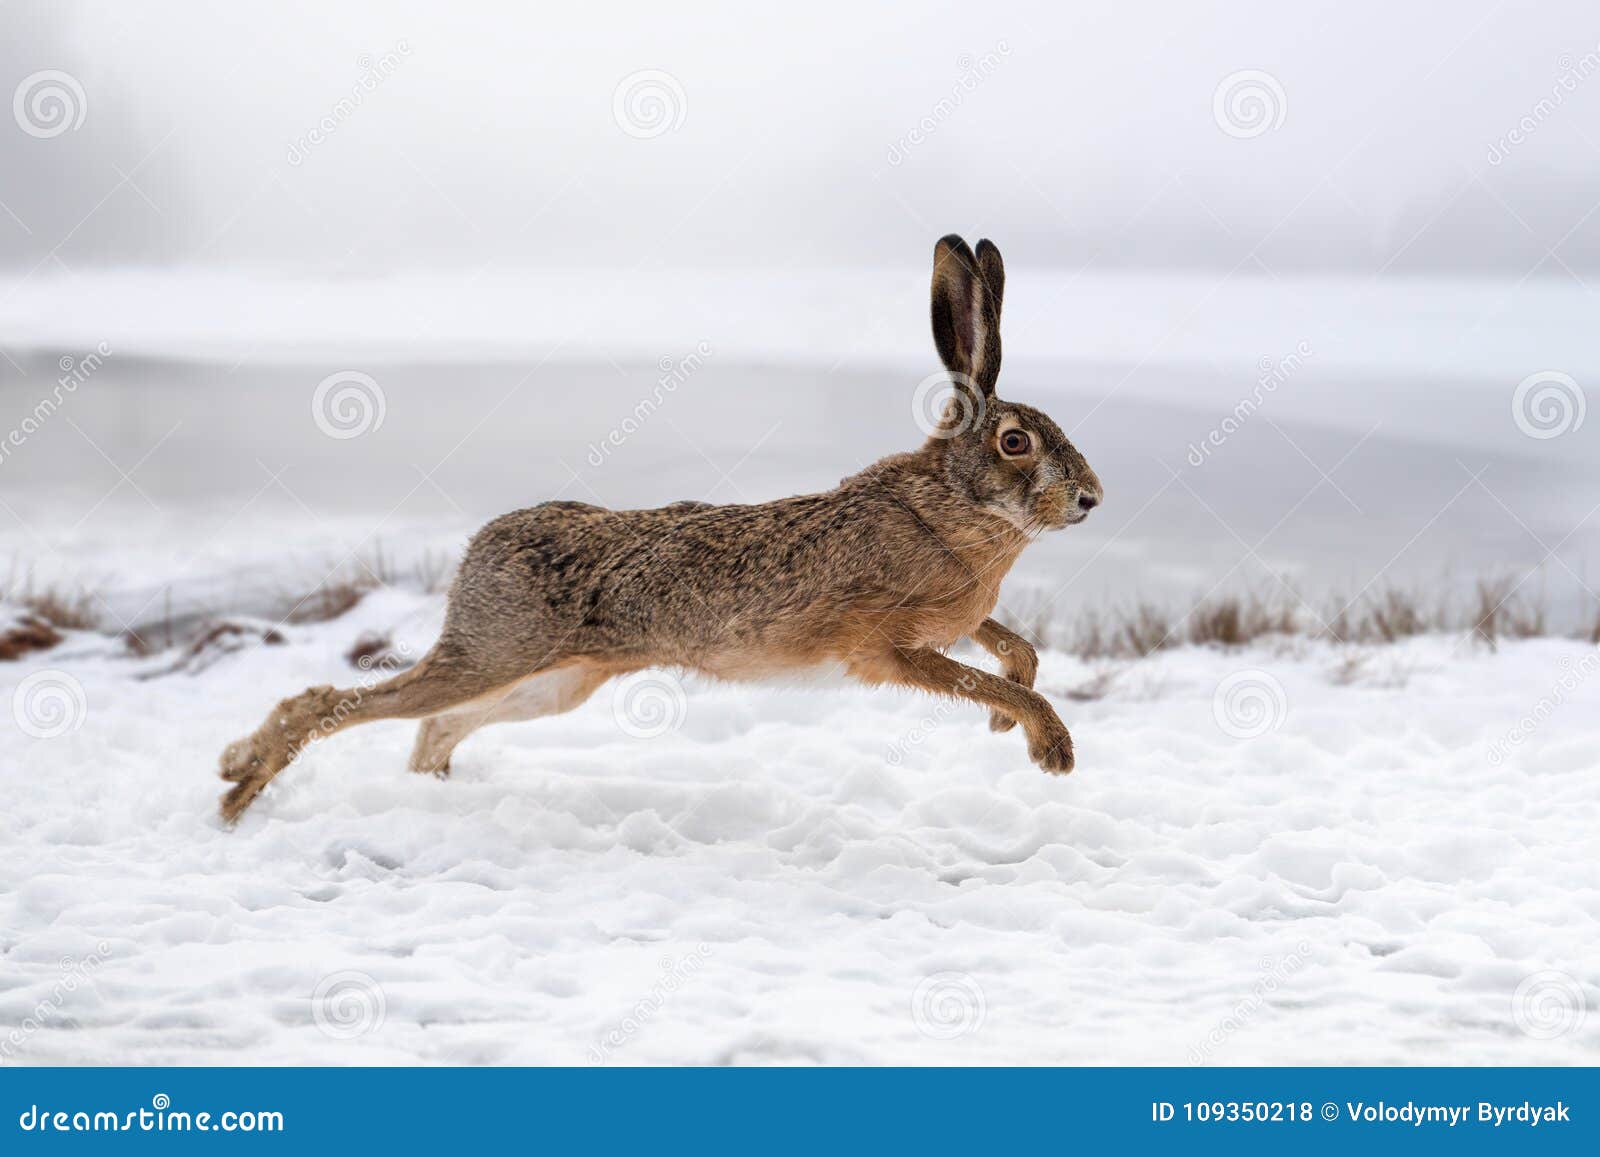 hare running in the field